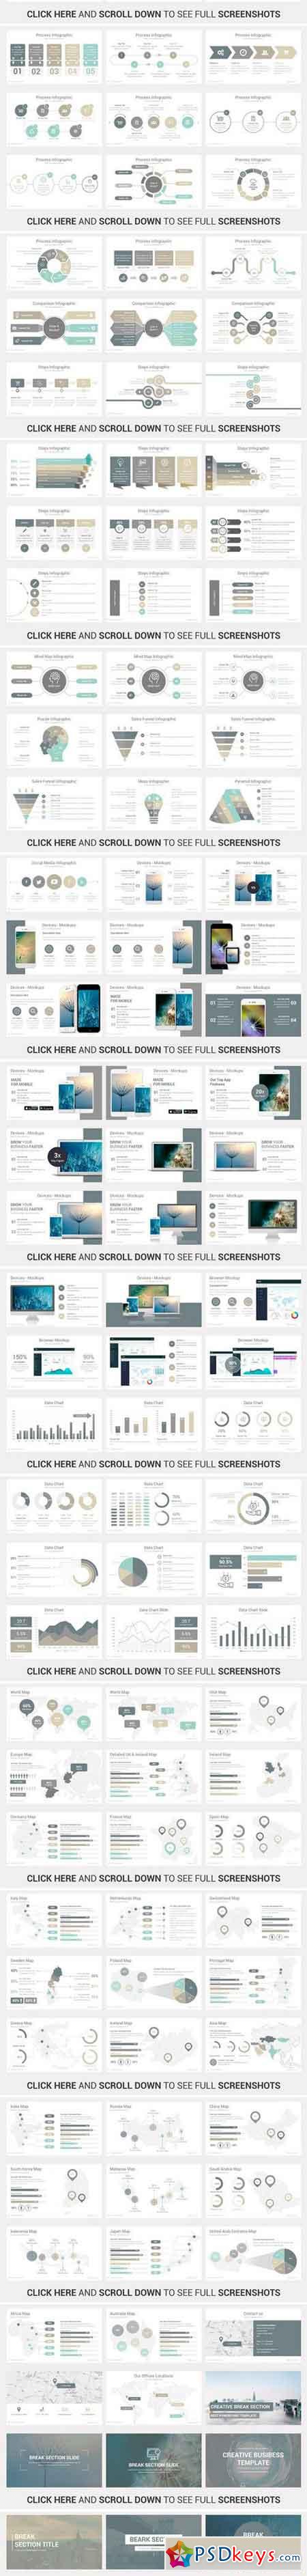 Simplicity PowerPoint 2380048